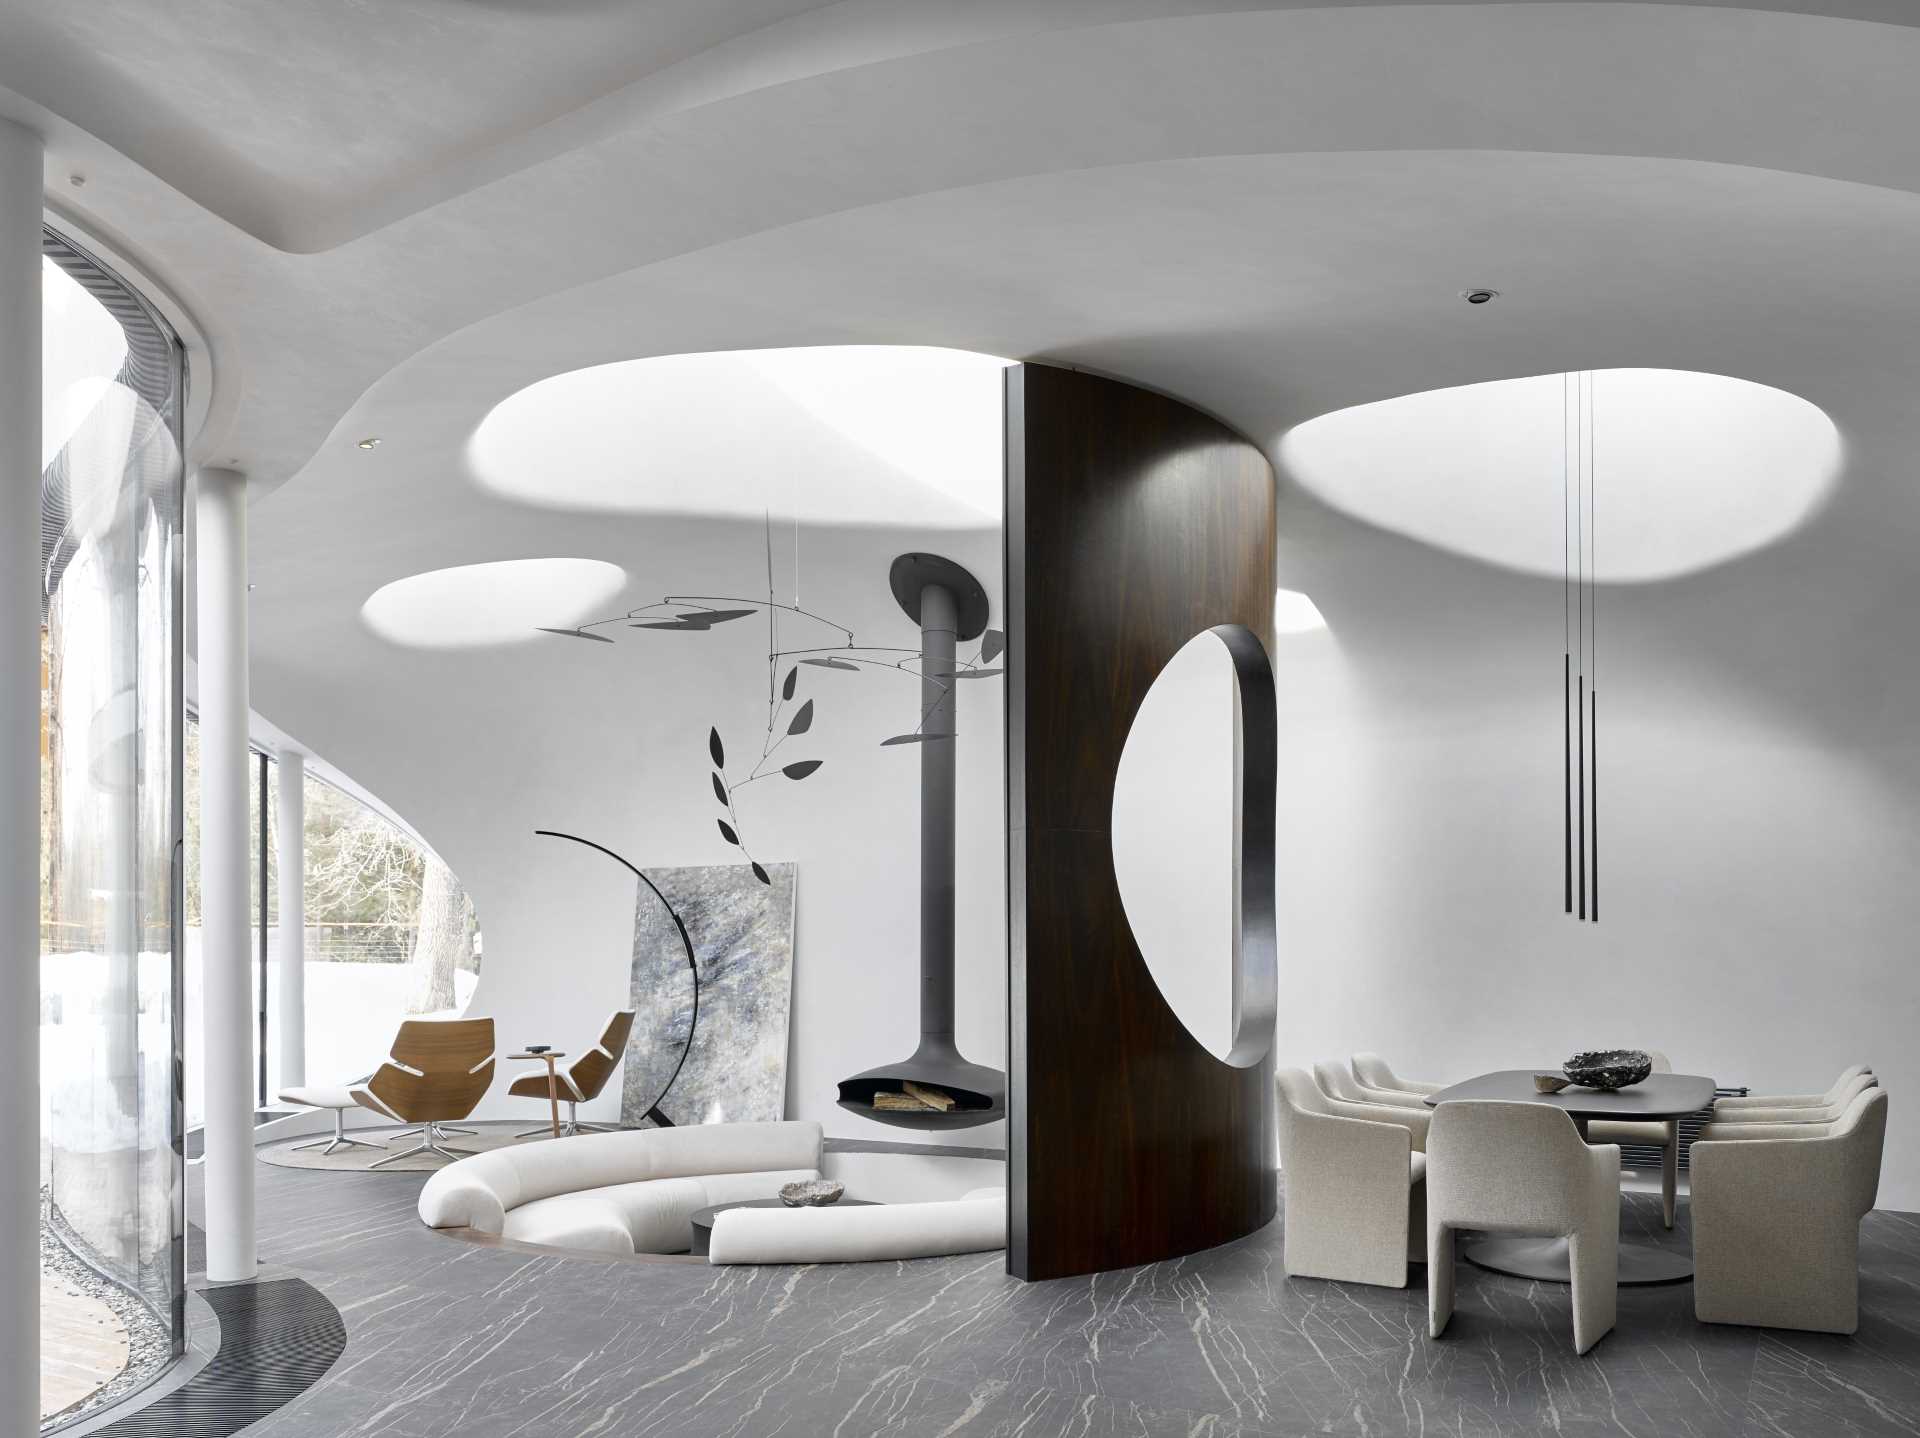 The organic shapes of this modern house continue through to the interior, with skylights, and a round sunken living room with a hanging fireplace. A curved partition wall with a round opening separates the dining room from the living room.